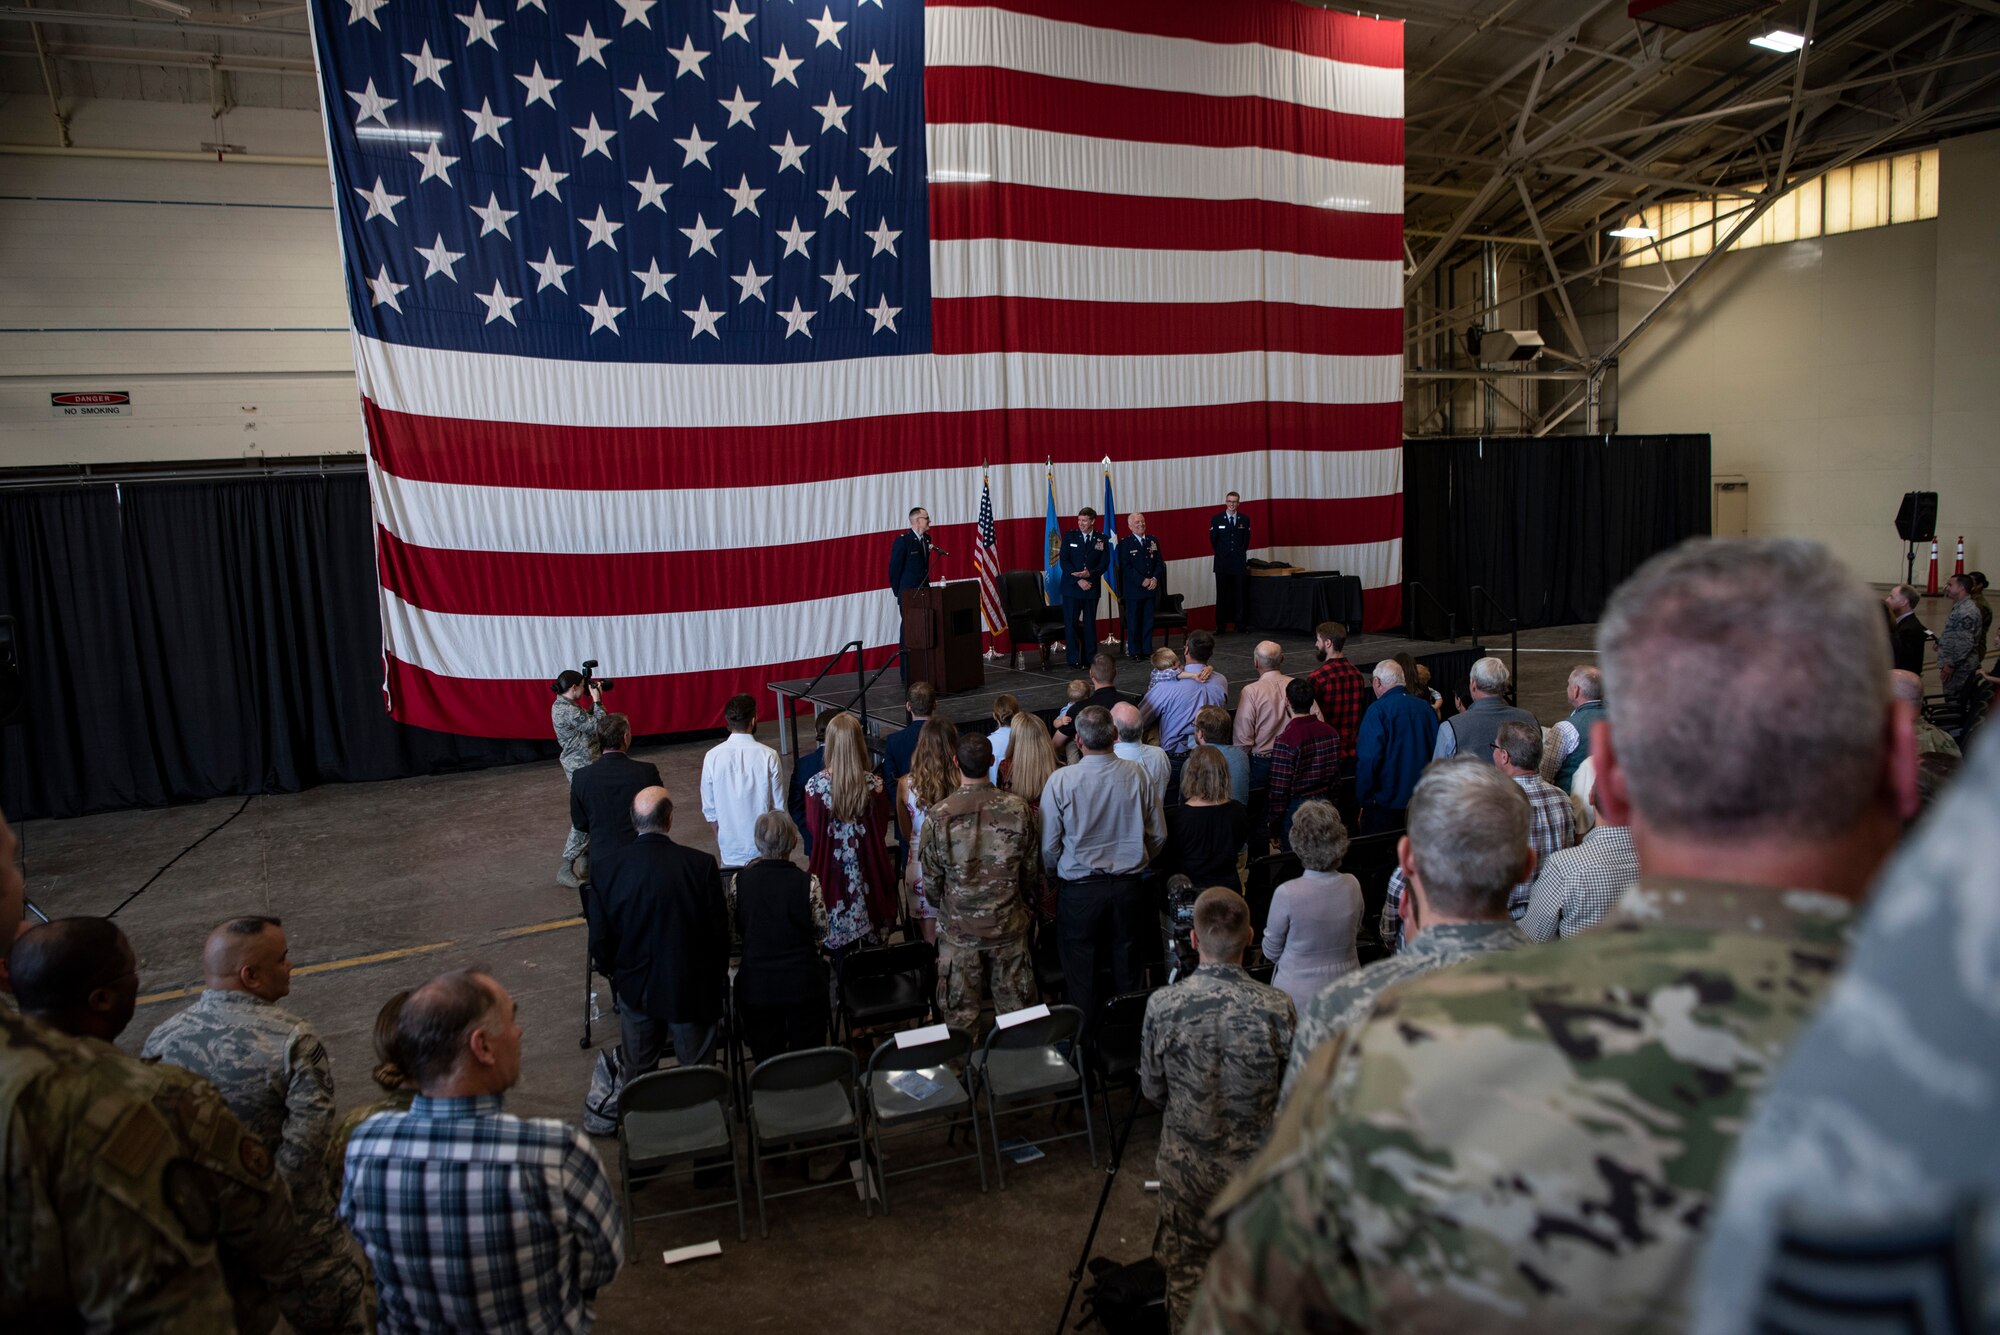 Col. Douglas Hayworth stands while the state song plays during his retirement ceremony at Will Rogers Air National Guard Base in Oklahoma City on May 4, 2019. Hayworth retired after serving more than 30 years with the Wing.(U.S. Air National Guard photo by Staff Sgt. Brigette Waltermire)